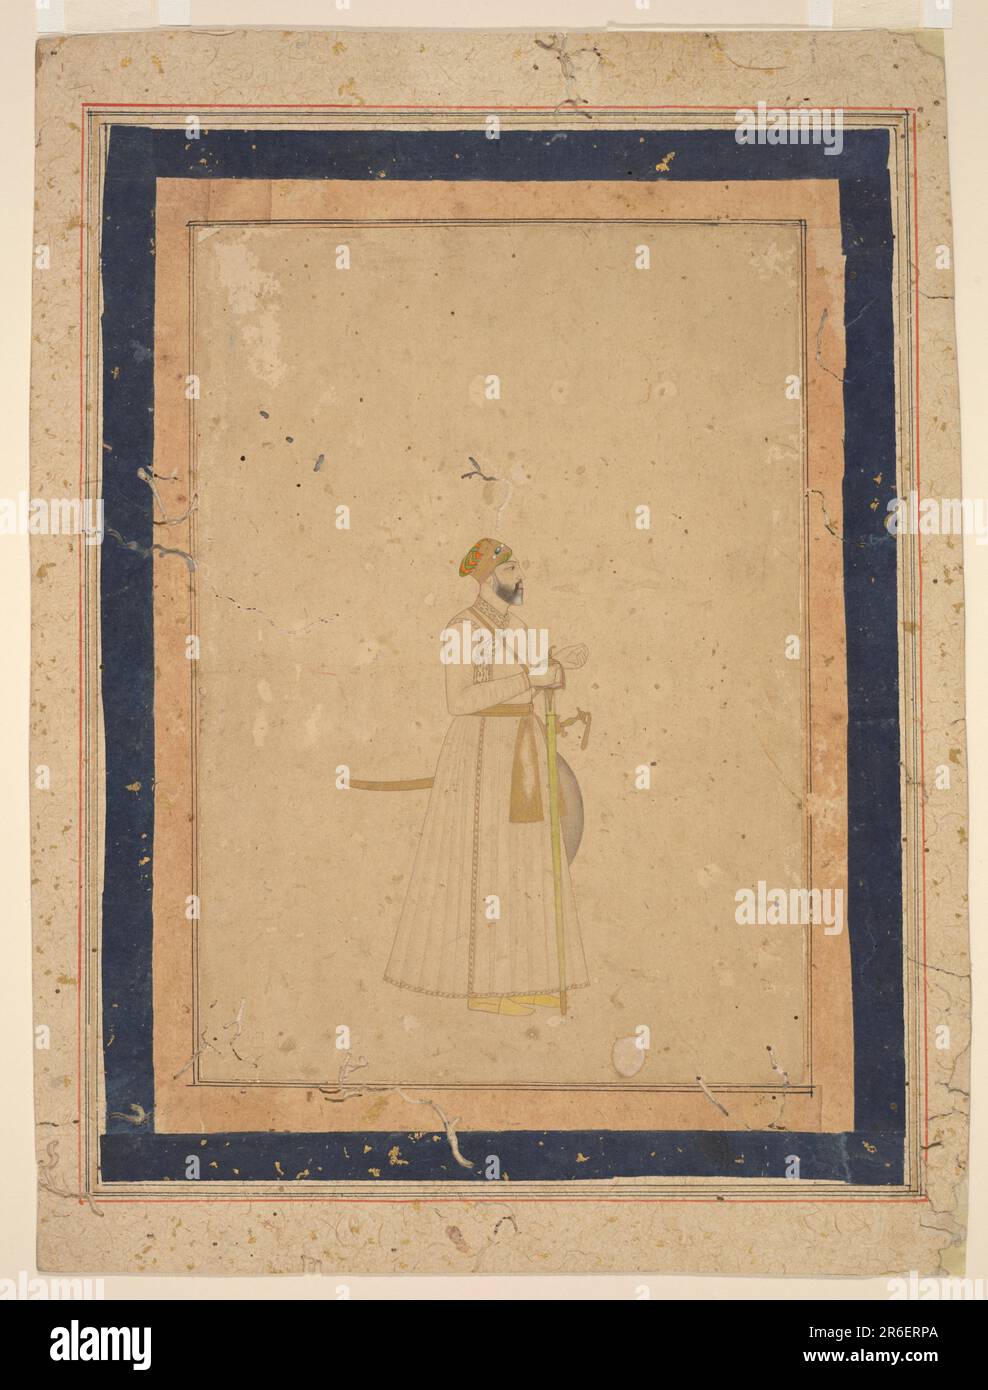 Portrait of an officer. Date: early 18th century. Origin: India. Period: Mughal dynasty. Color and gold on paper. Museum: Freer Gallery of Art and Arthur M. Sackler Gallery. Stock Photo